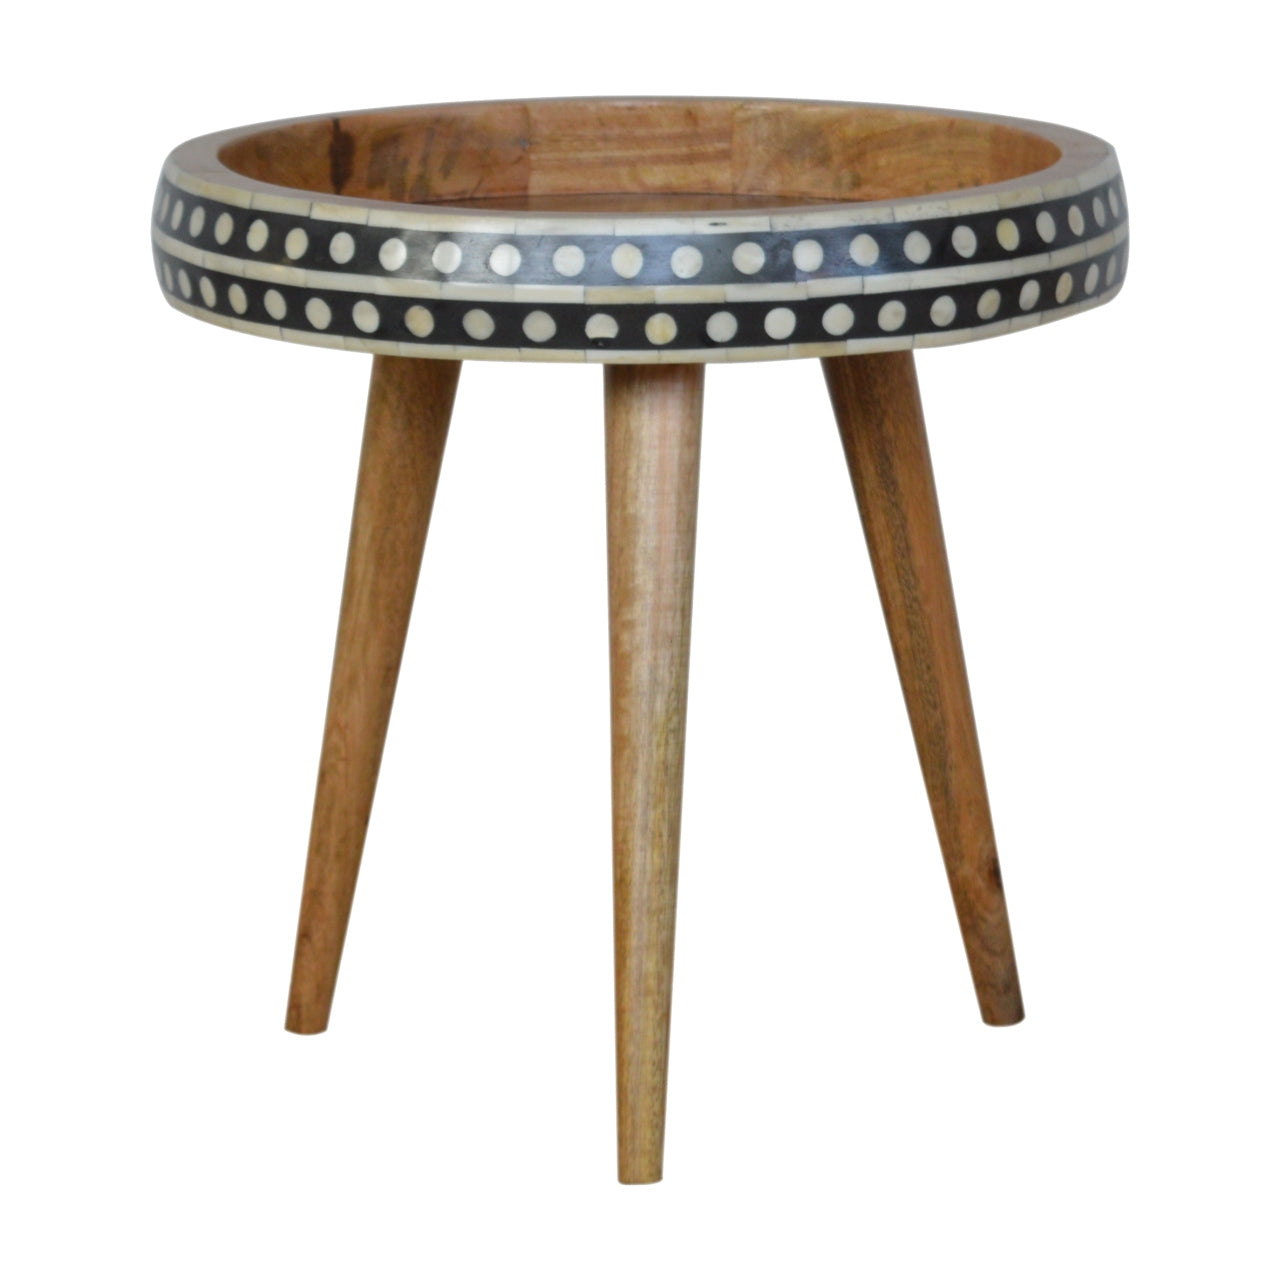 small 3 legged side table with bone inlay detail